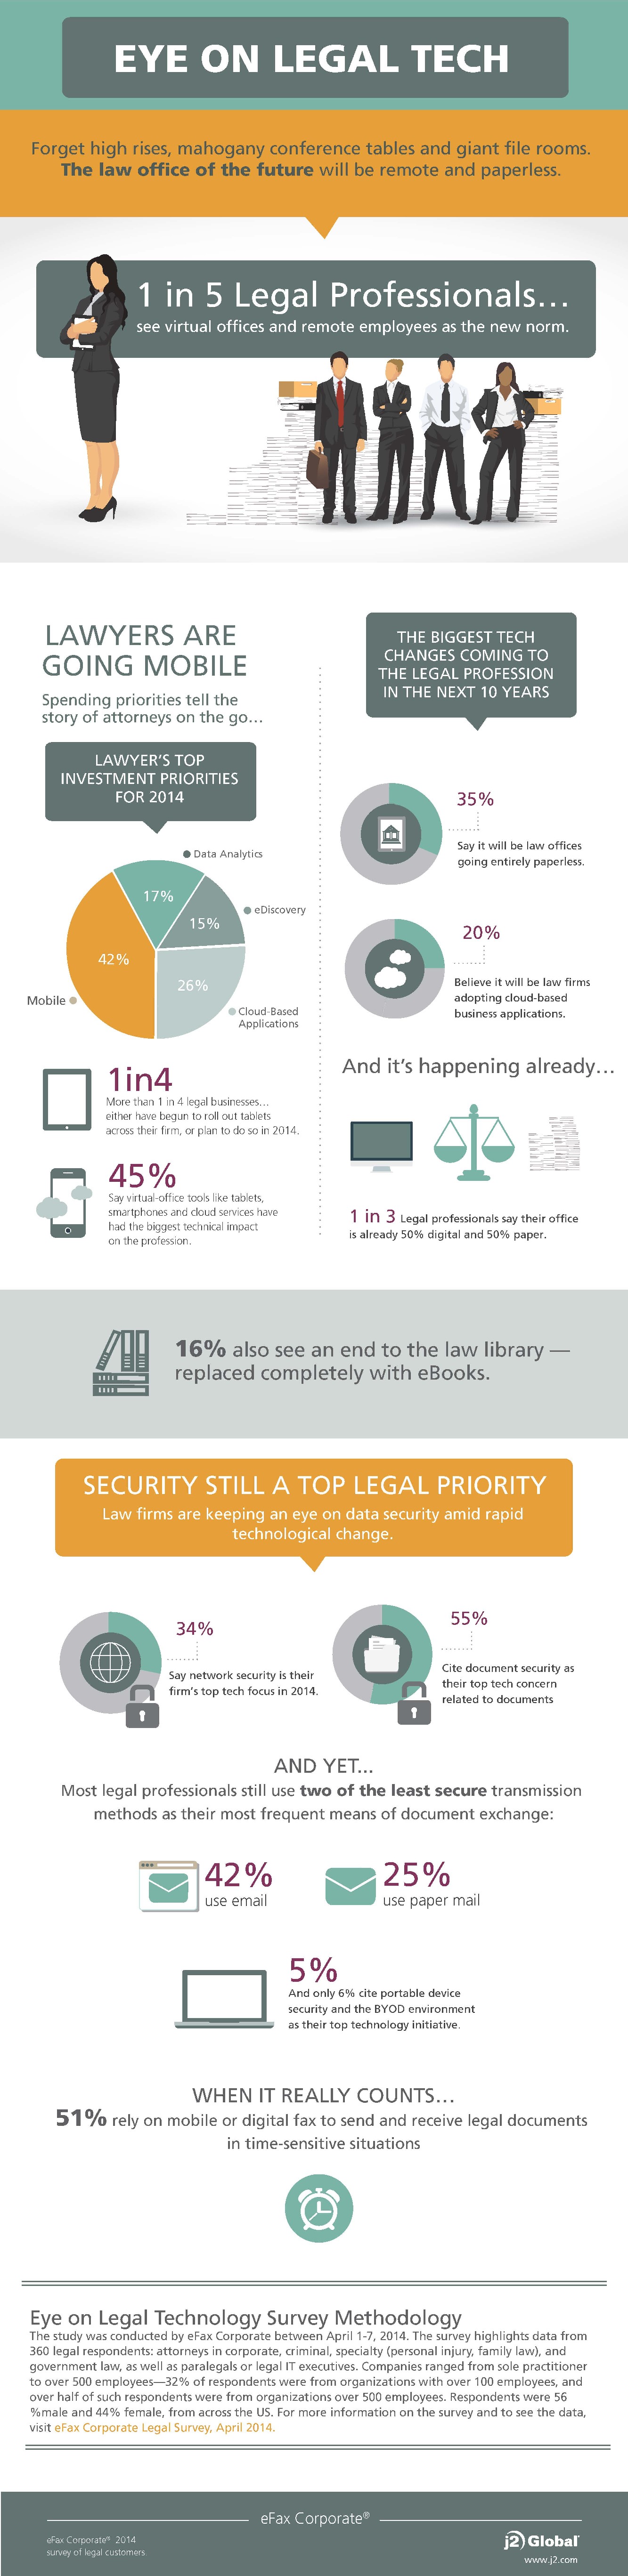 Eye on Legal Technology | Visual.ly